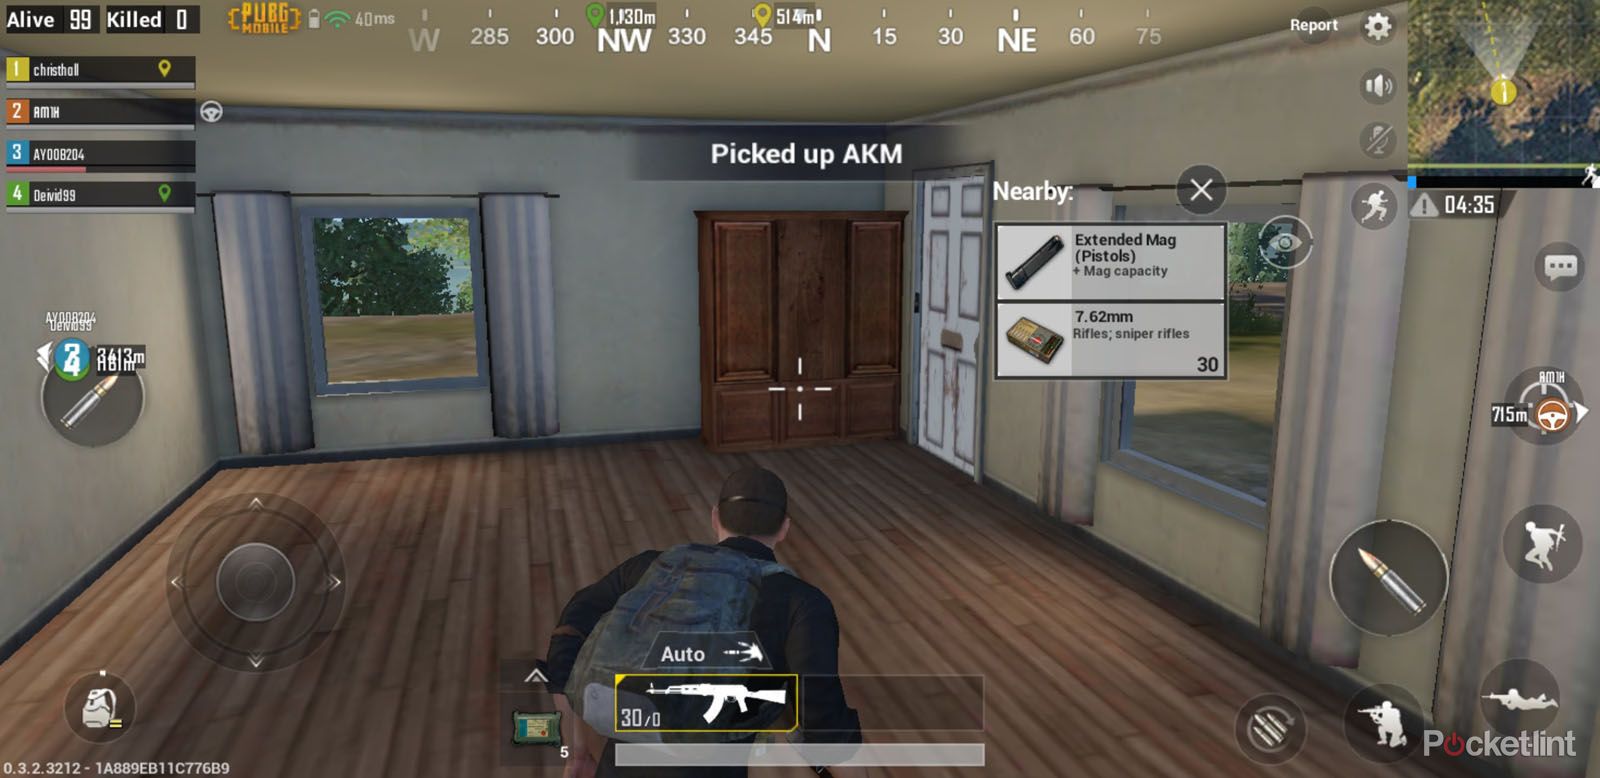 Playerunknowns Battlegrounds Mobile image 13